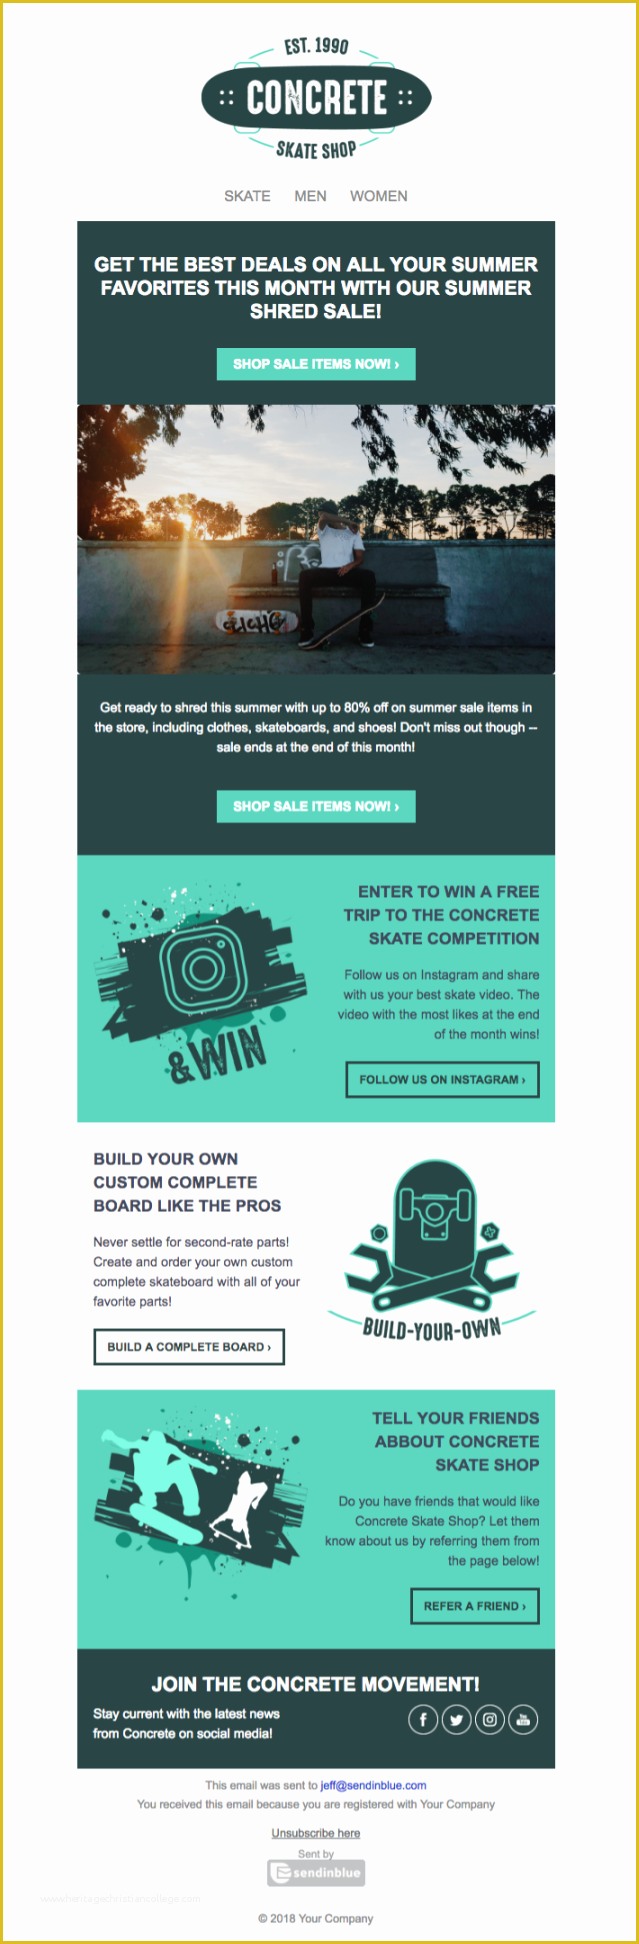 Company Newsletter Template Free Of 5 Free HTML Newsletter Templates to Wow Your Au Nce